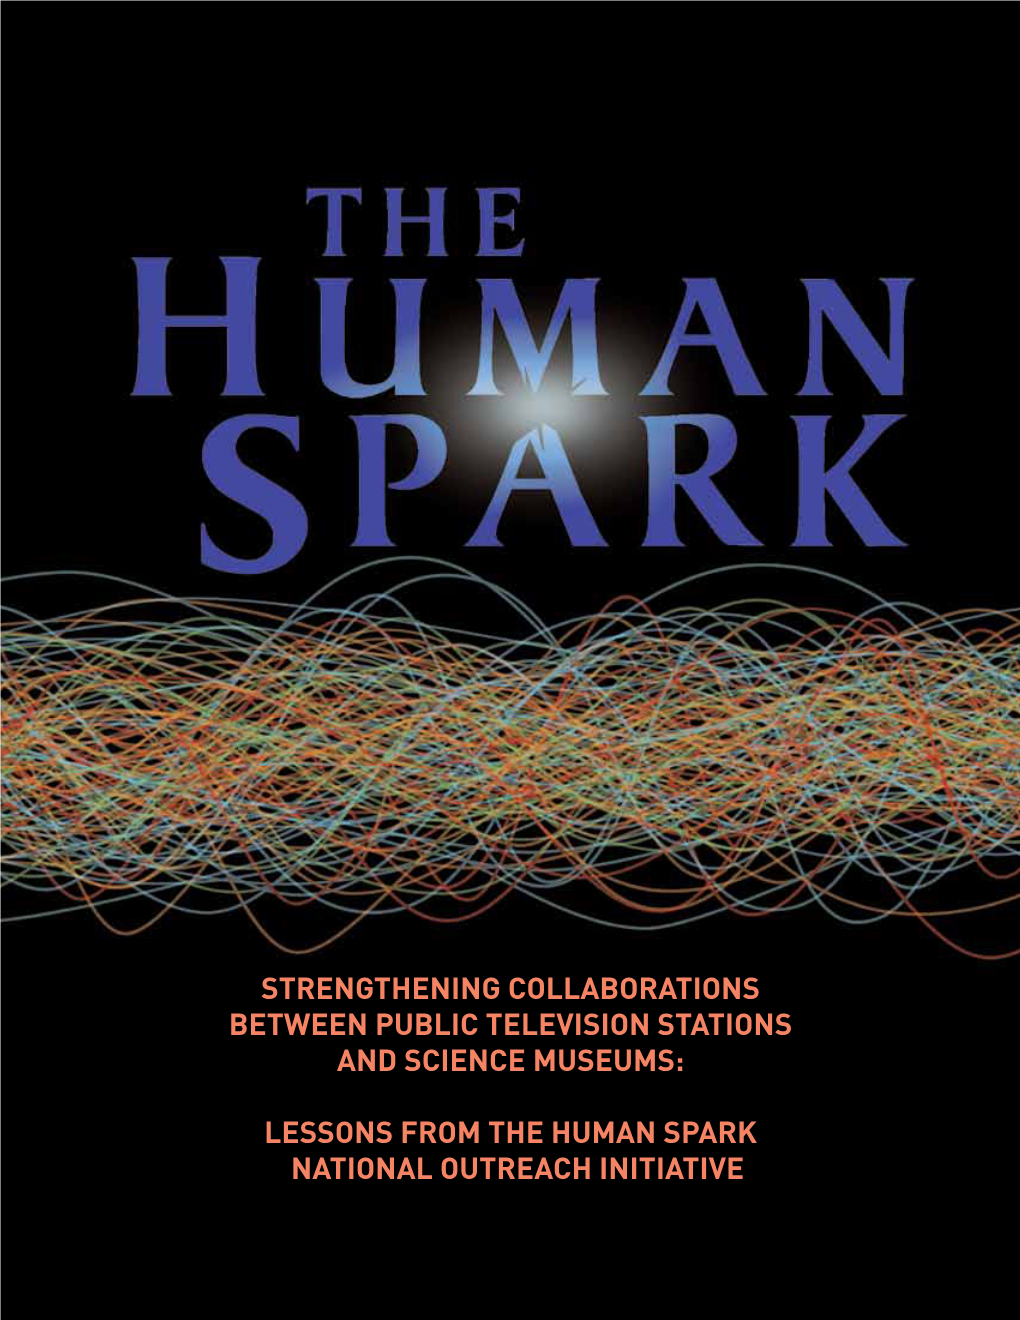 Strengthening Collaborations Between Public Television Stations and Science Museums: Lessons from the Human Spark National Outreach